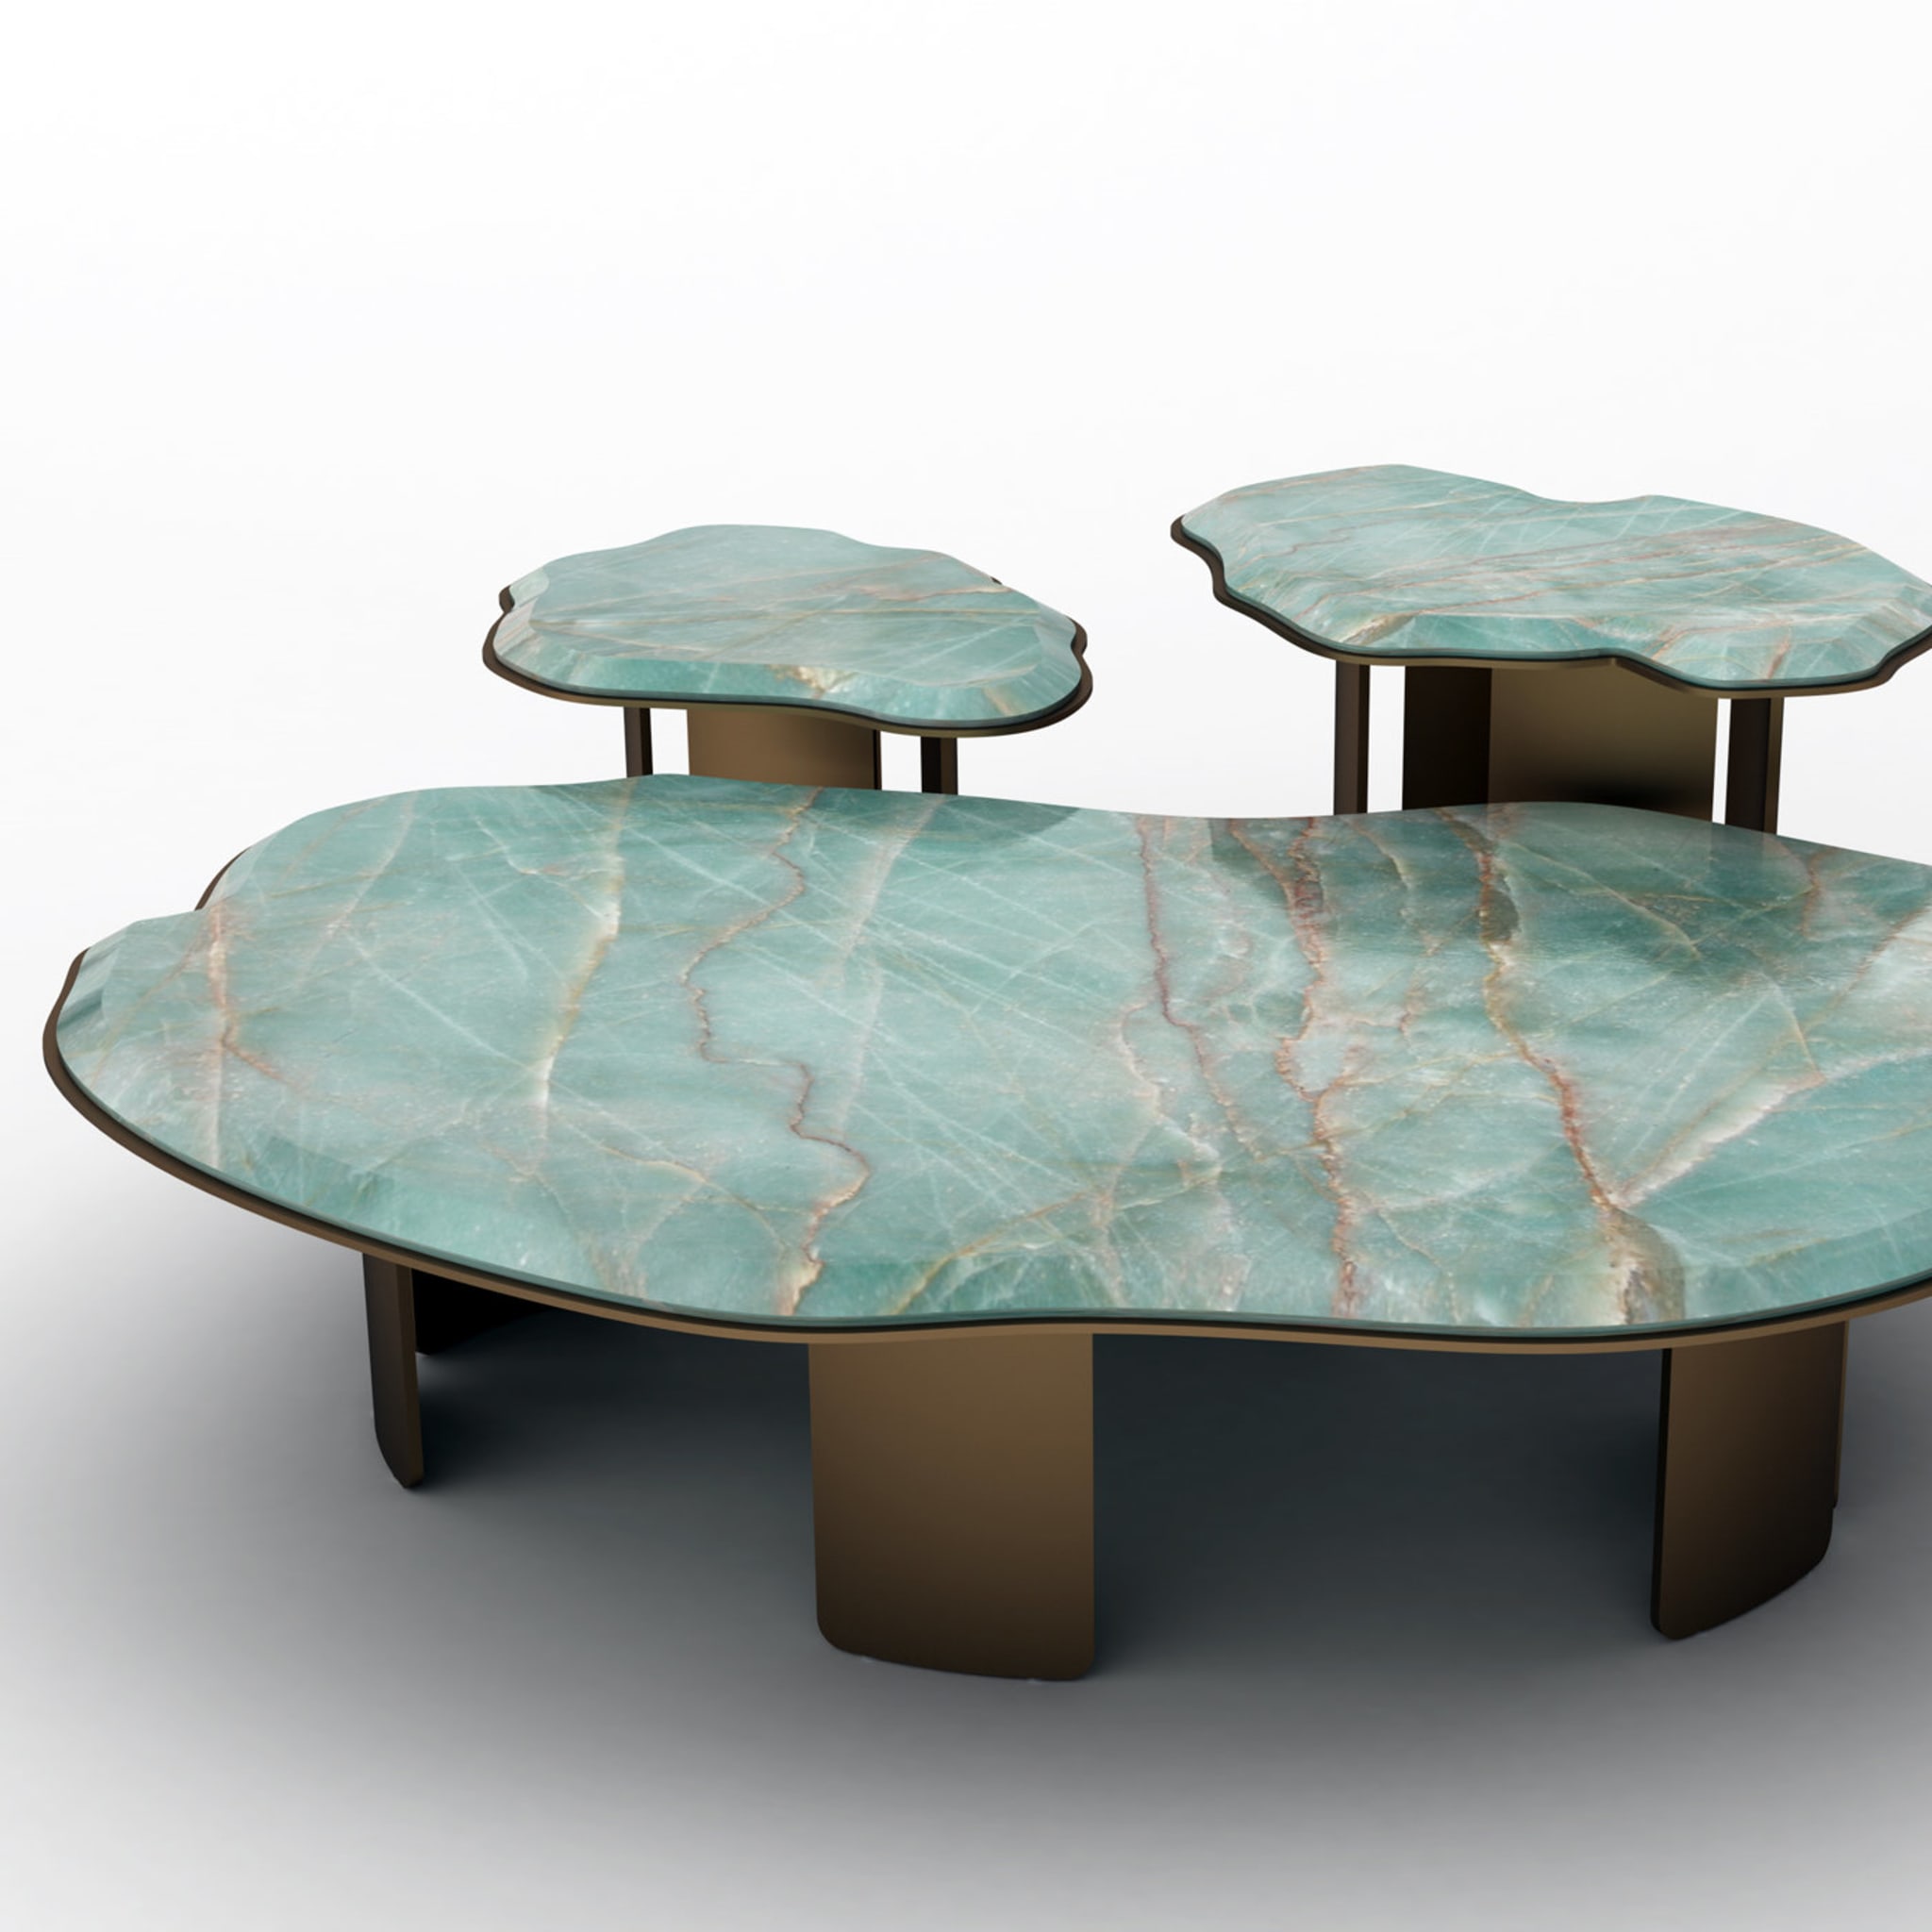 Claude Large Coffee Table - Alternative view 1